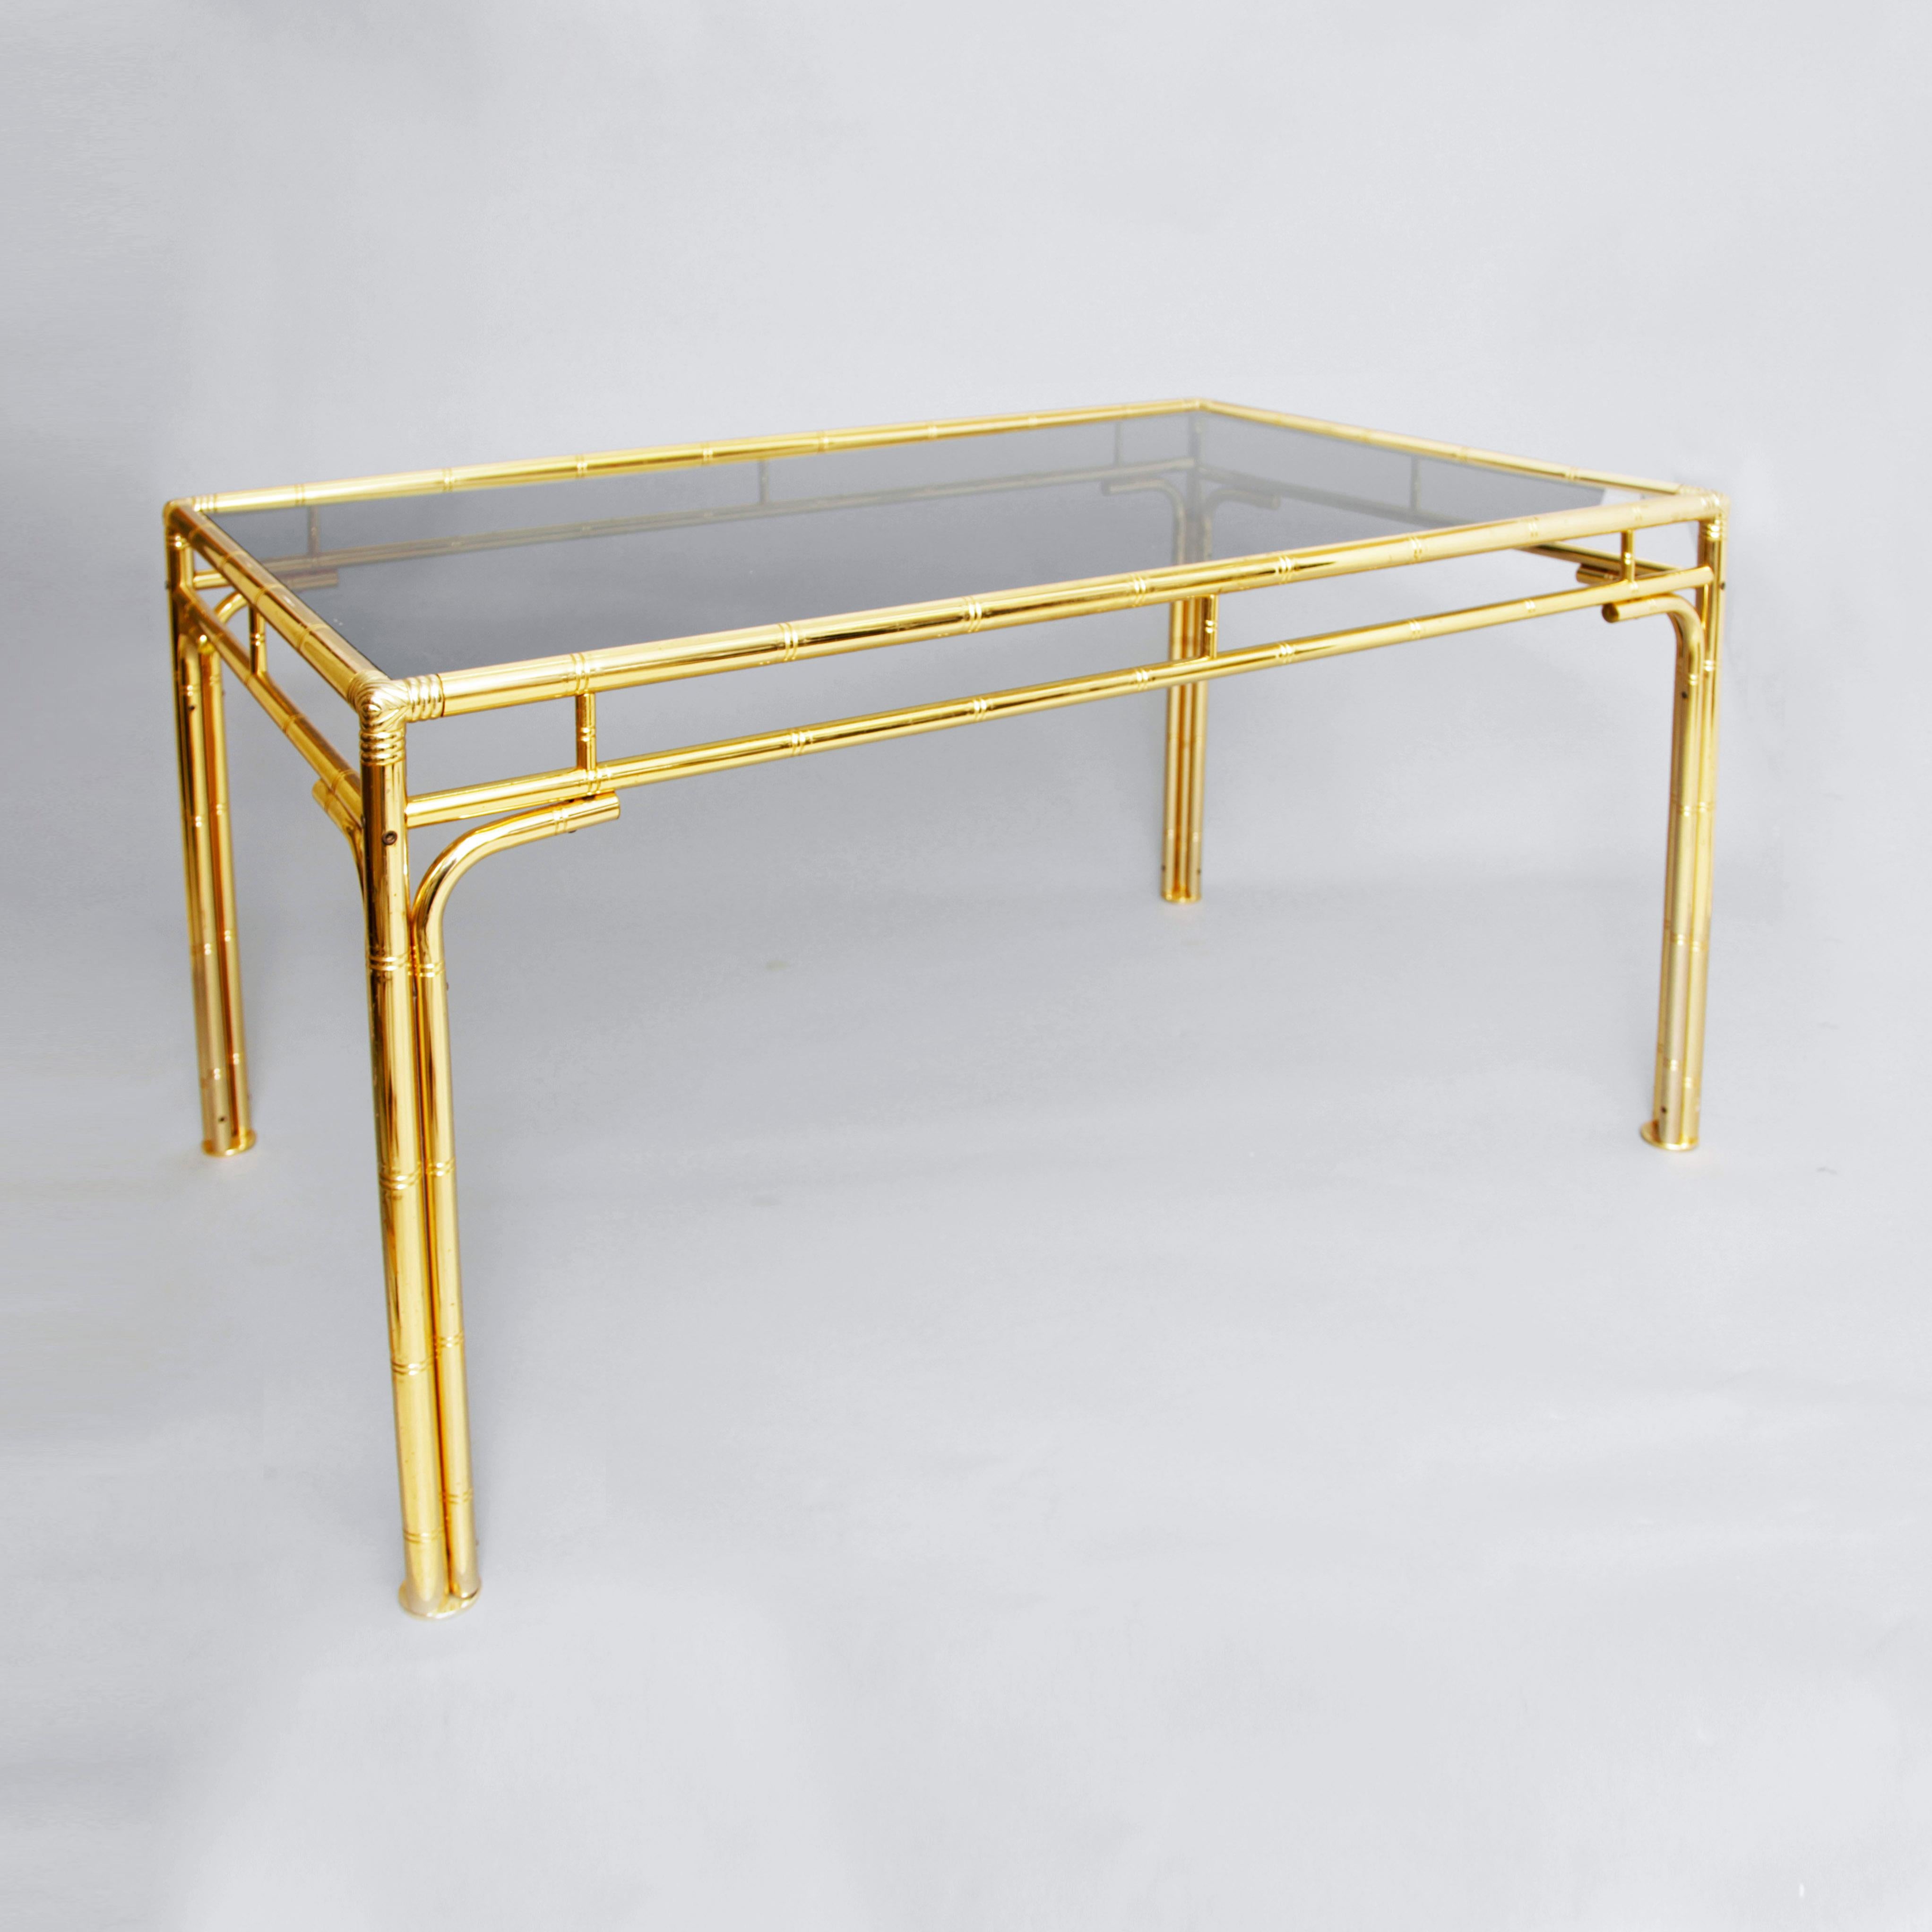 Elegant Hollywood Regency style brass faux bamboo dining table. Smoked glass top. 



CREATOR: Unknown

PLACE OF ORIGIN: Italy

DATE OF MANUFACTURE: c. 1970's

PERIOD: 1970-1979

MATERIALS & TECHNIQUES: Brass, Glass

CONDITION: Good